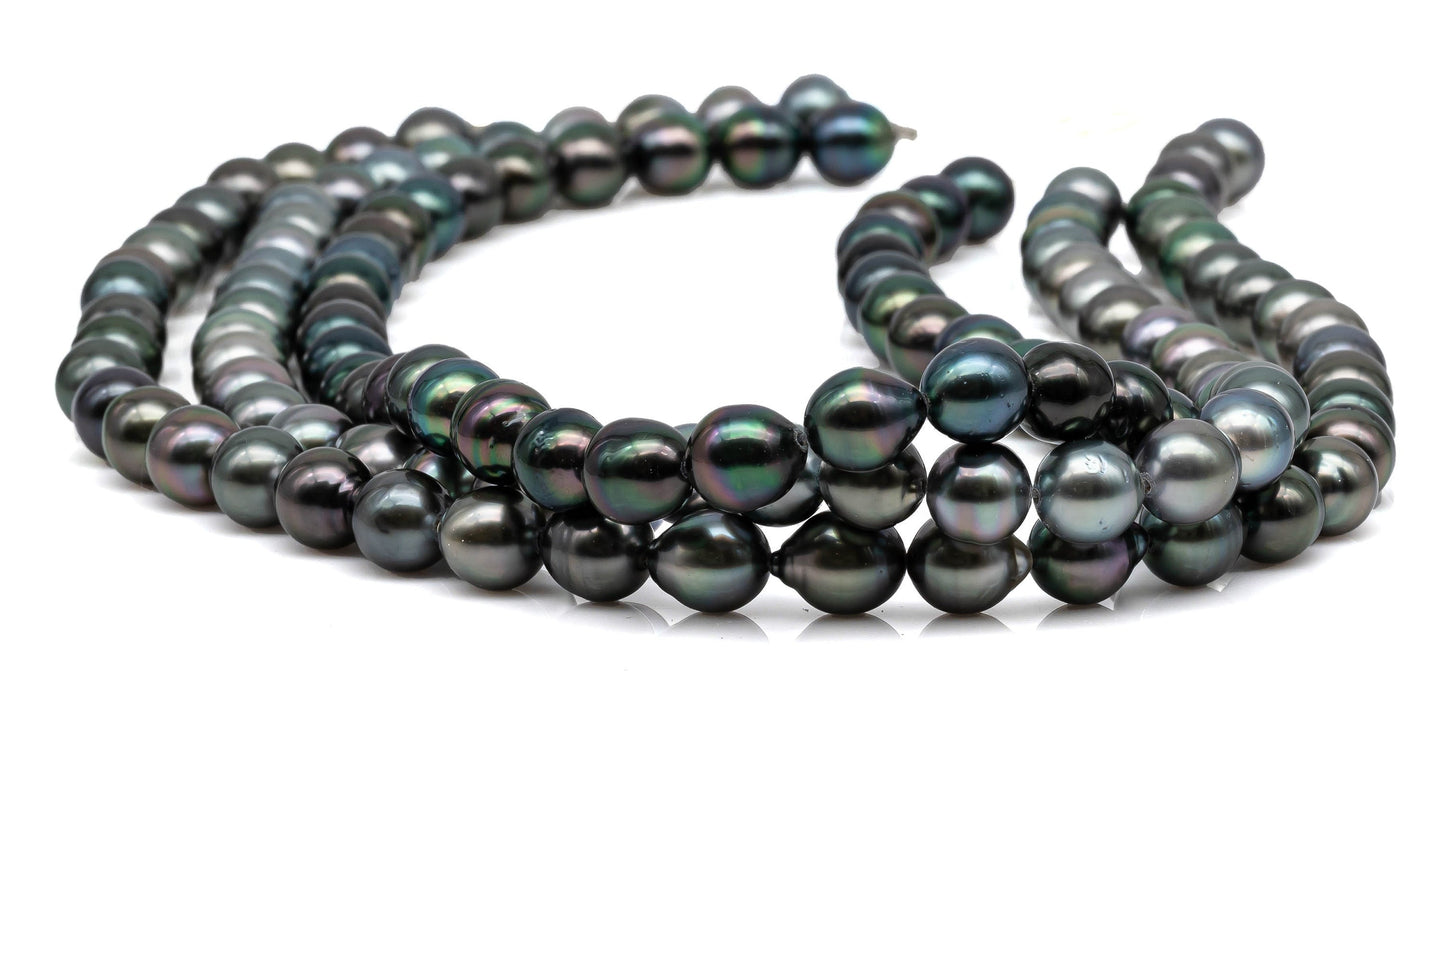 Tahitian Pearl Near Round with Extremely Nice Luster and Limited Blemishes, Full Strand Black Pearl Beads in 8.5-9mm, SKU#1069TH